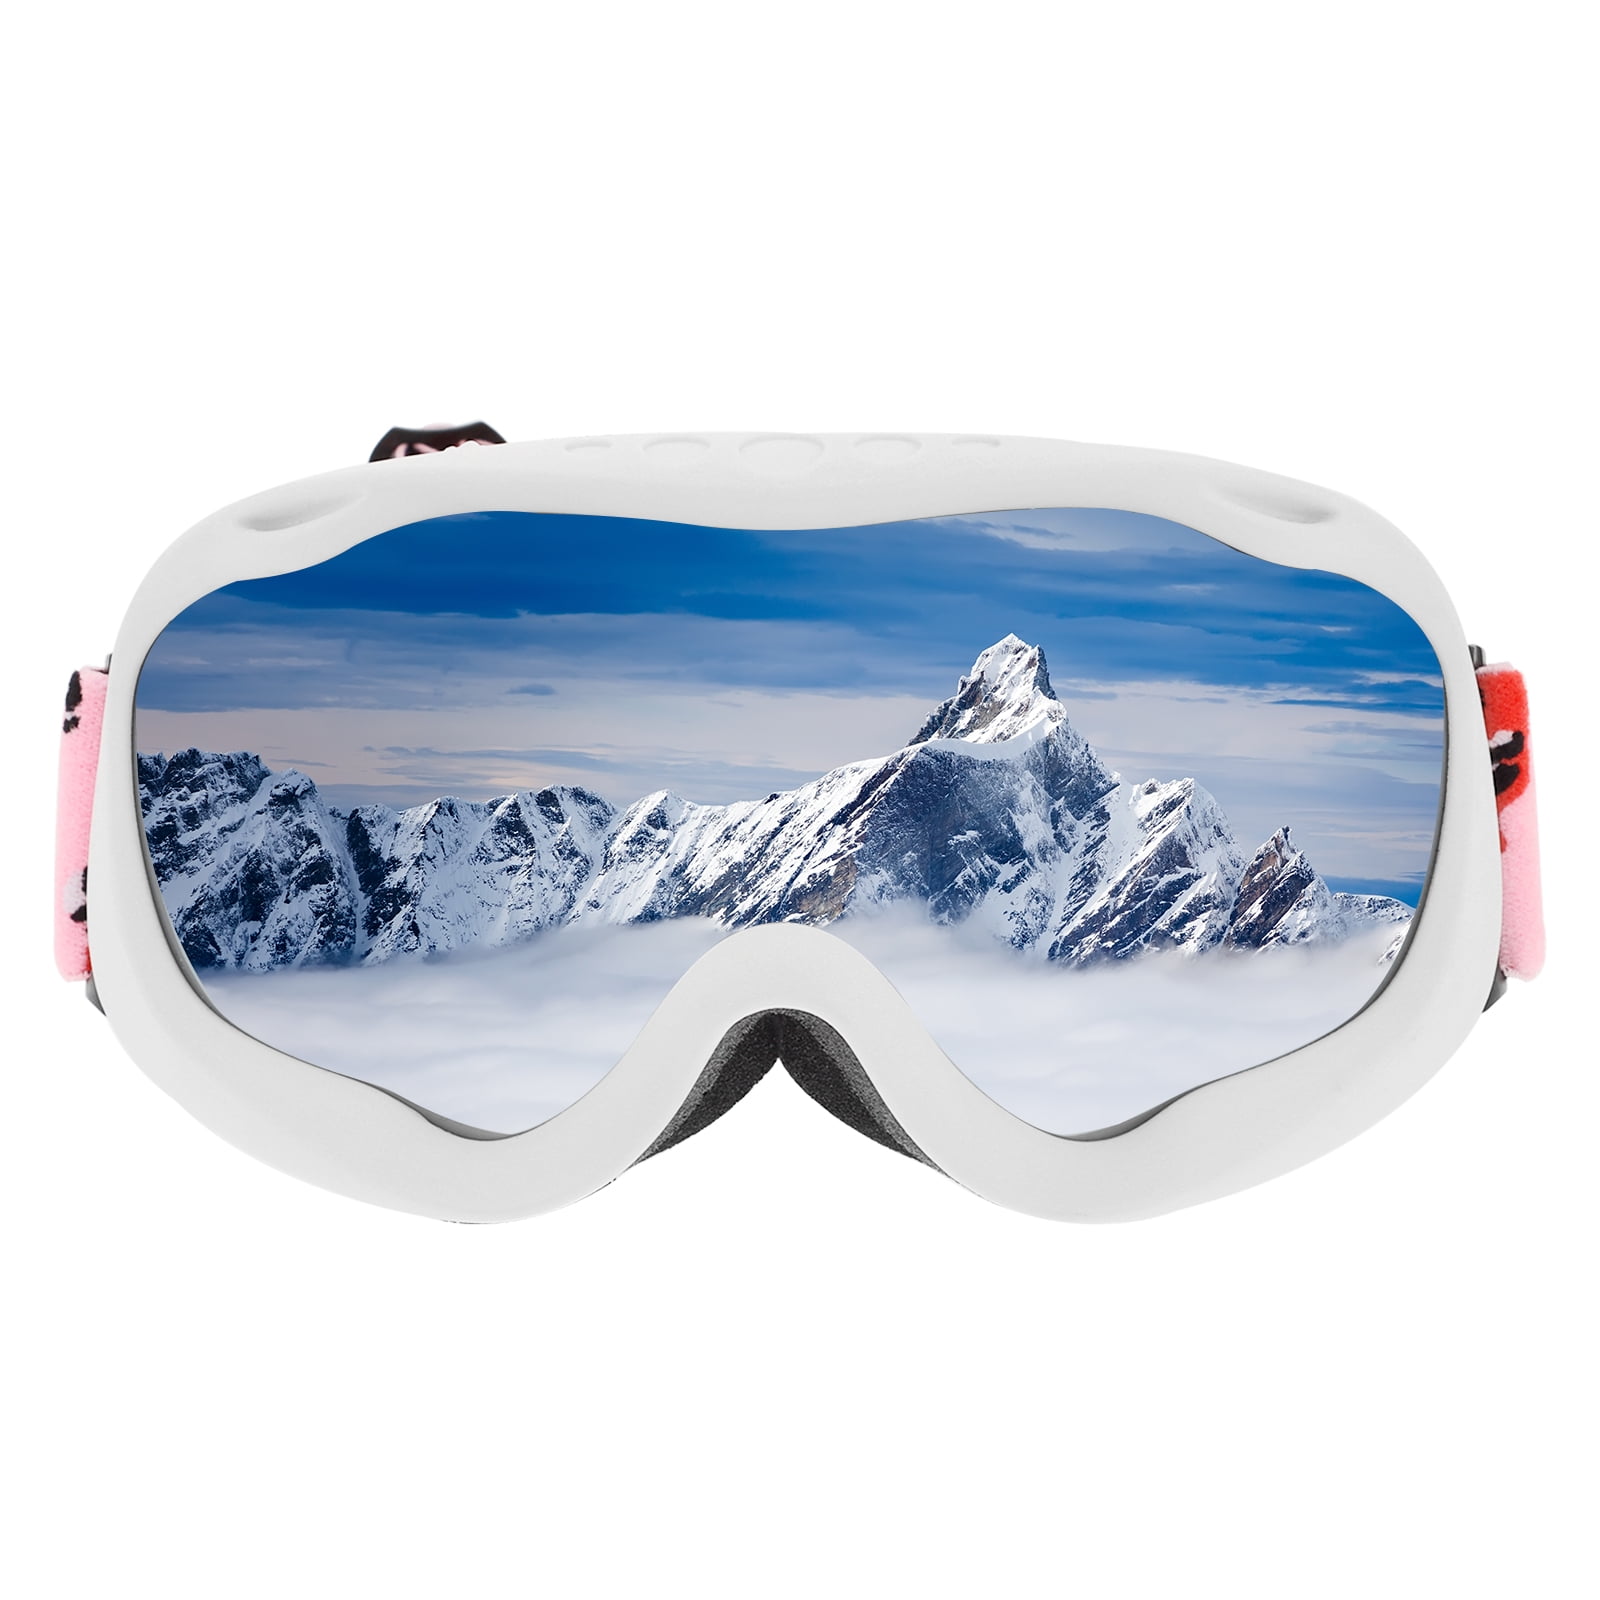 Mens Red Cross Snow Ski Goggles Winter Snowboard Large Double Lens Anti-Fog New 